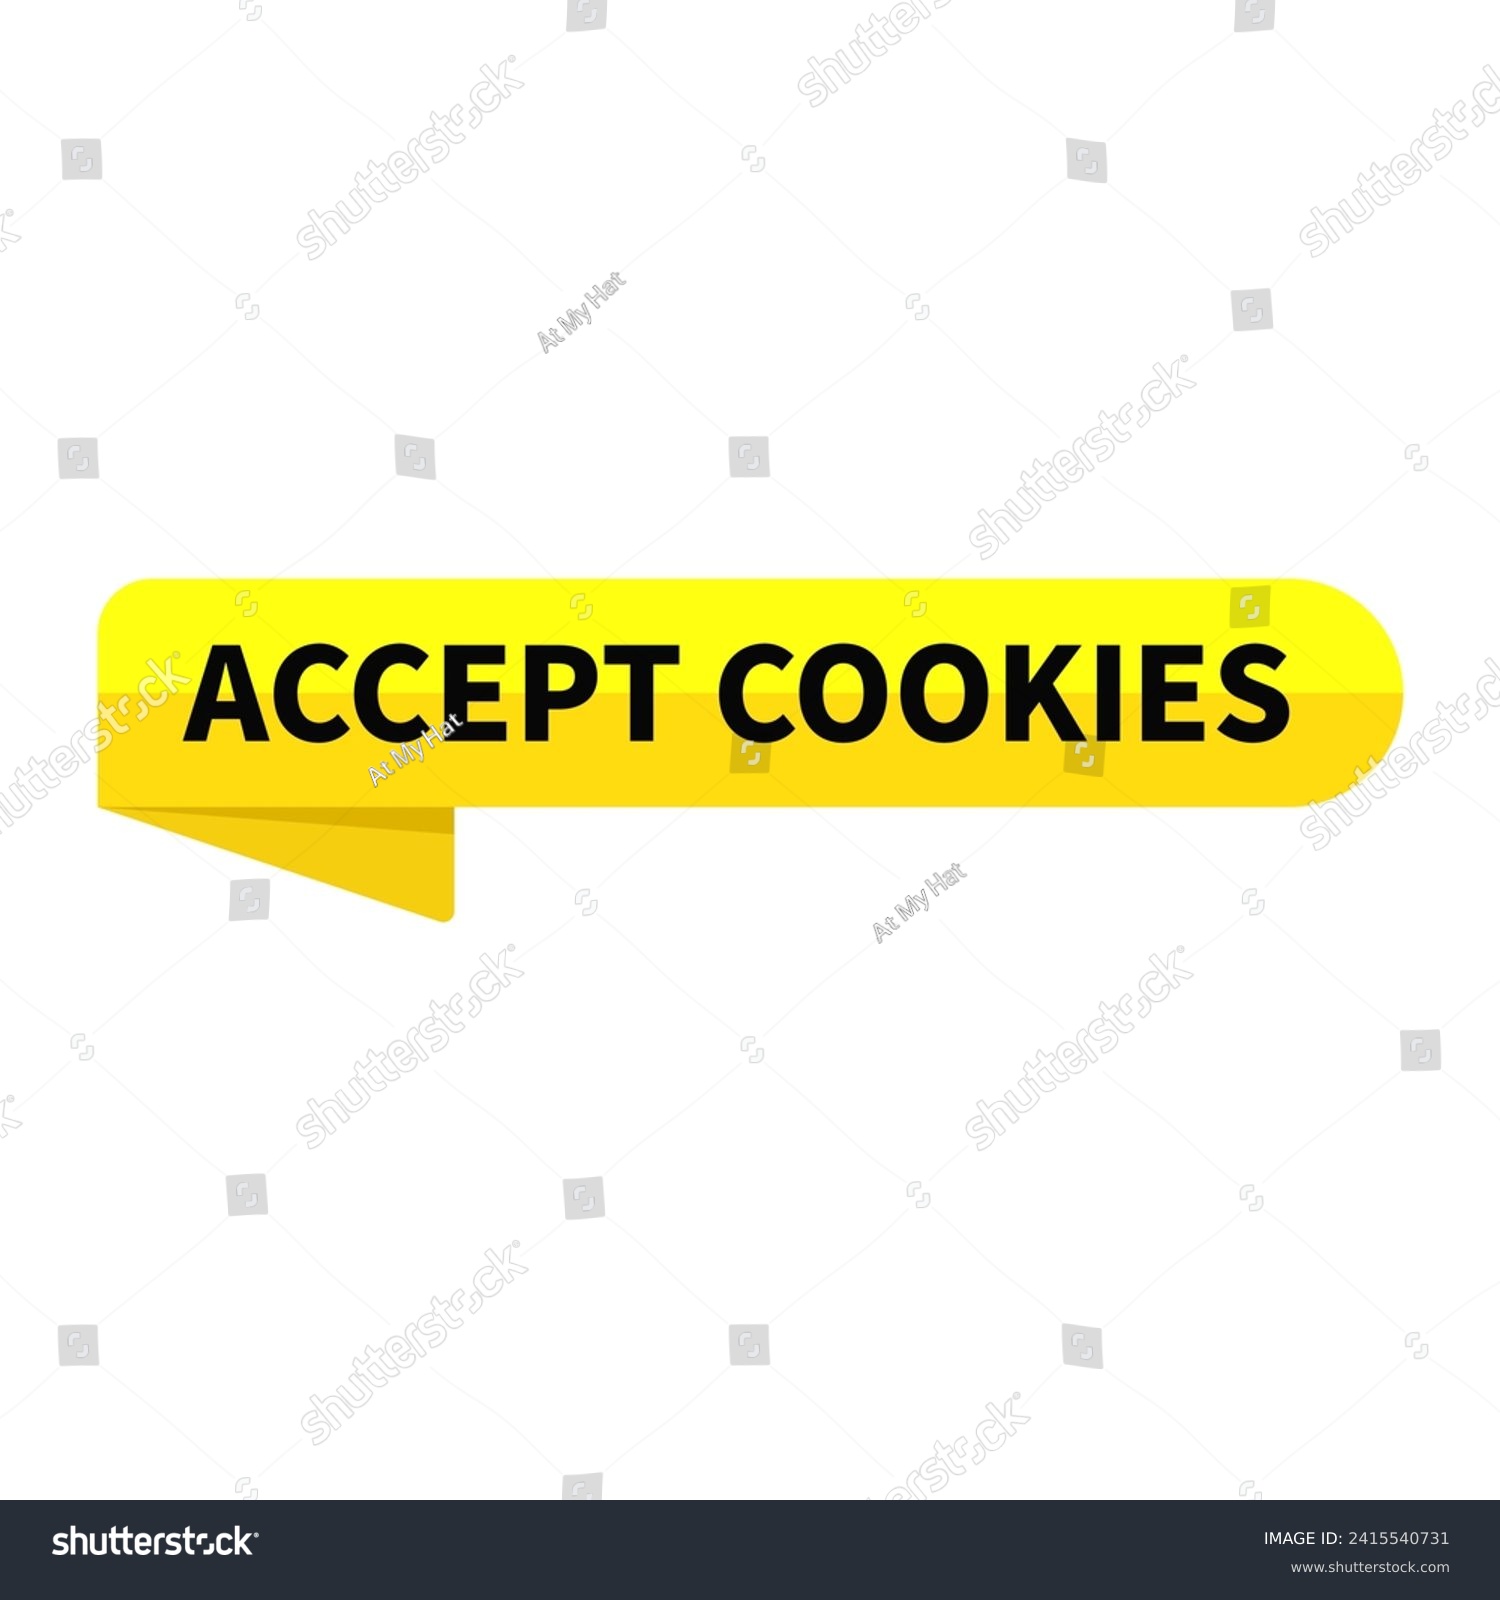 SVG of Accept Cookies Yellow Ribbon Rectangle Shape For Sign Information Website Security
 svg